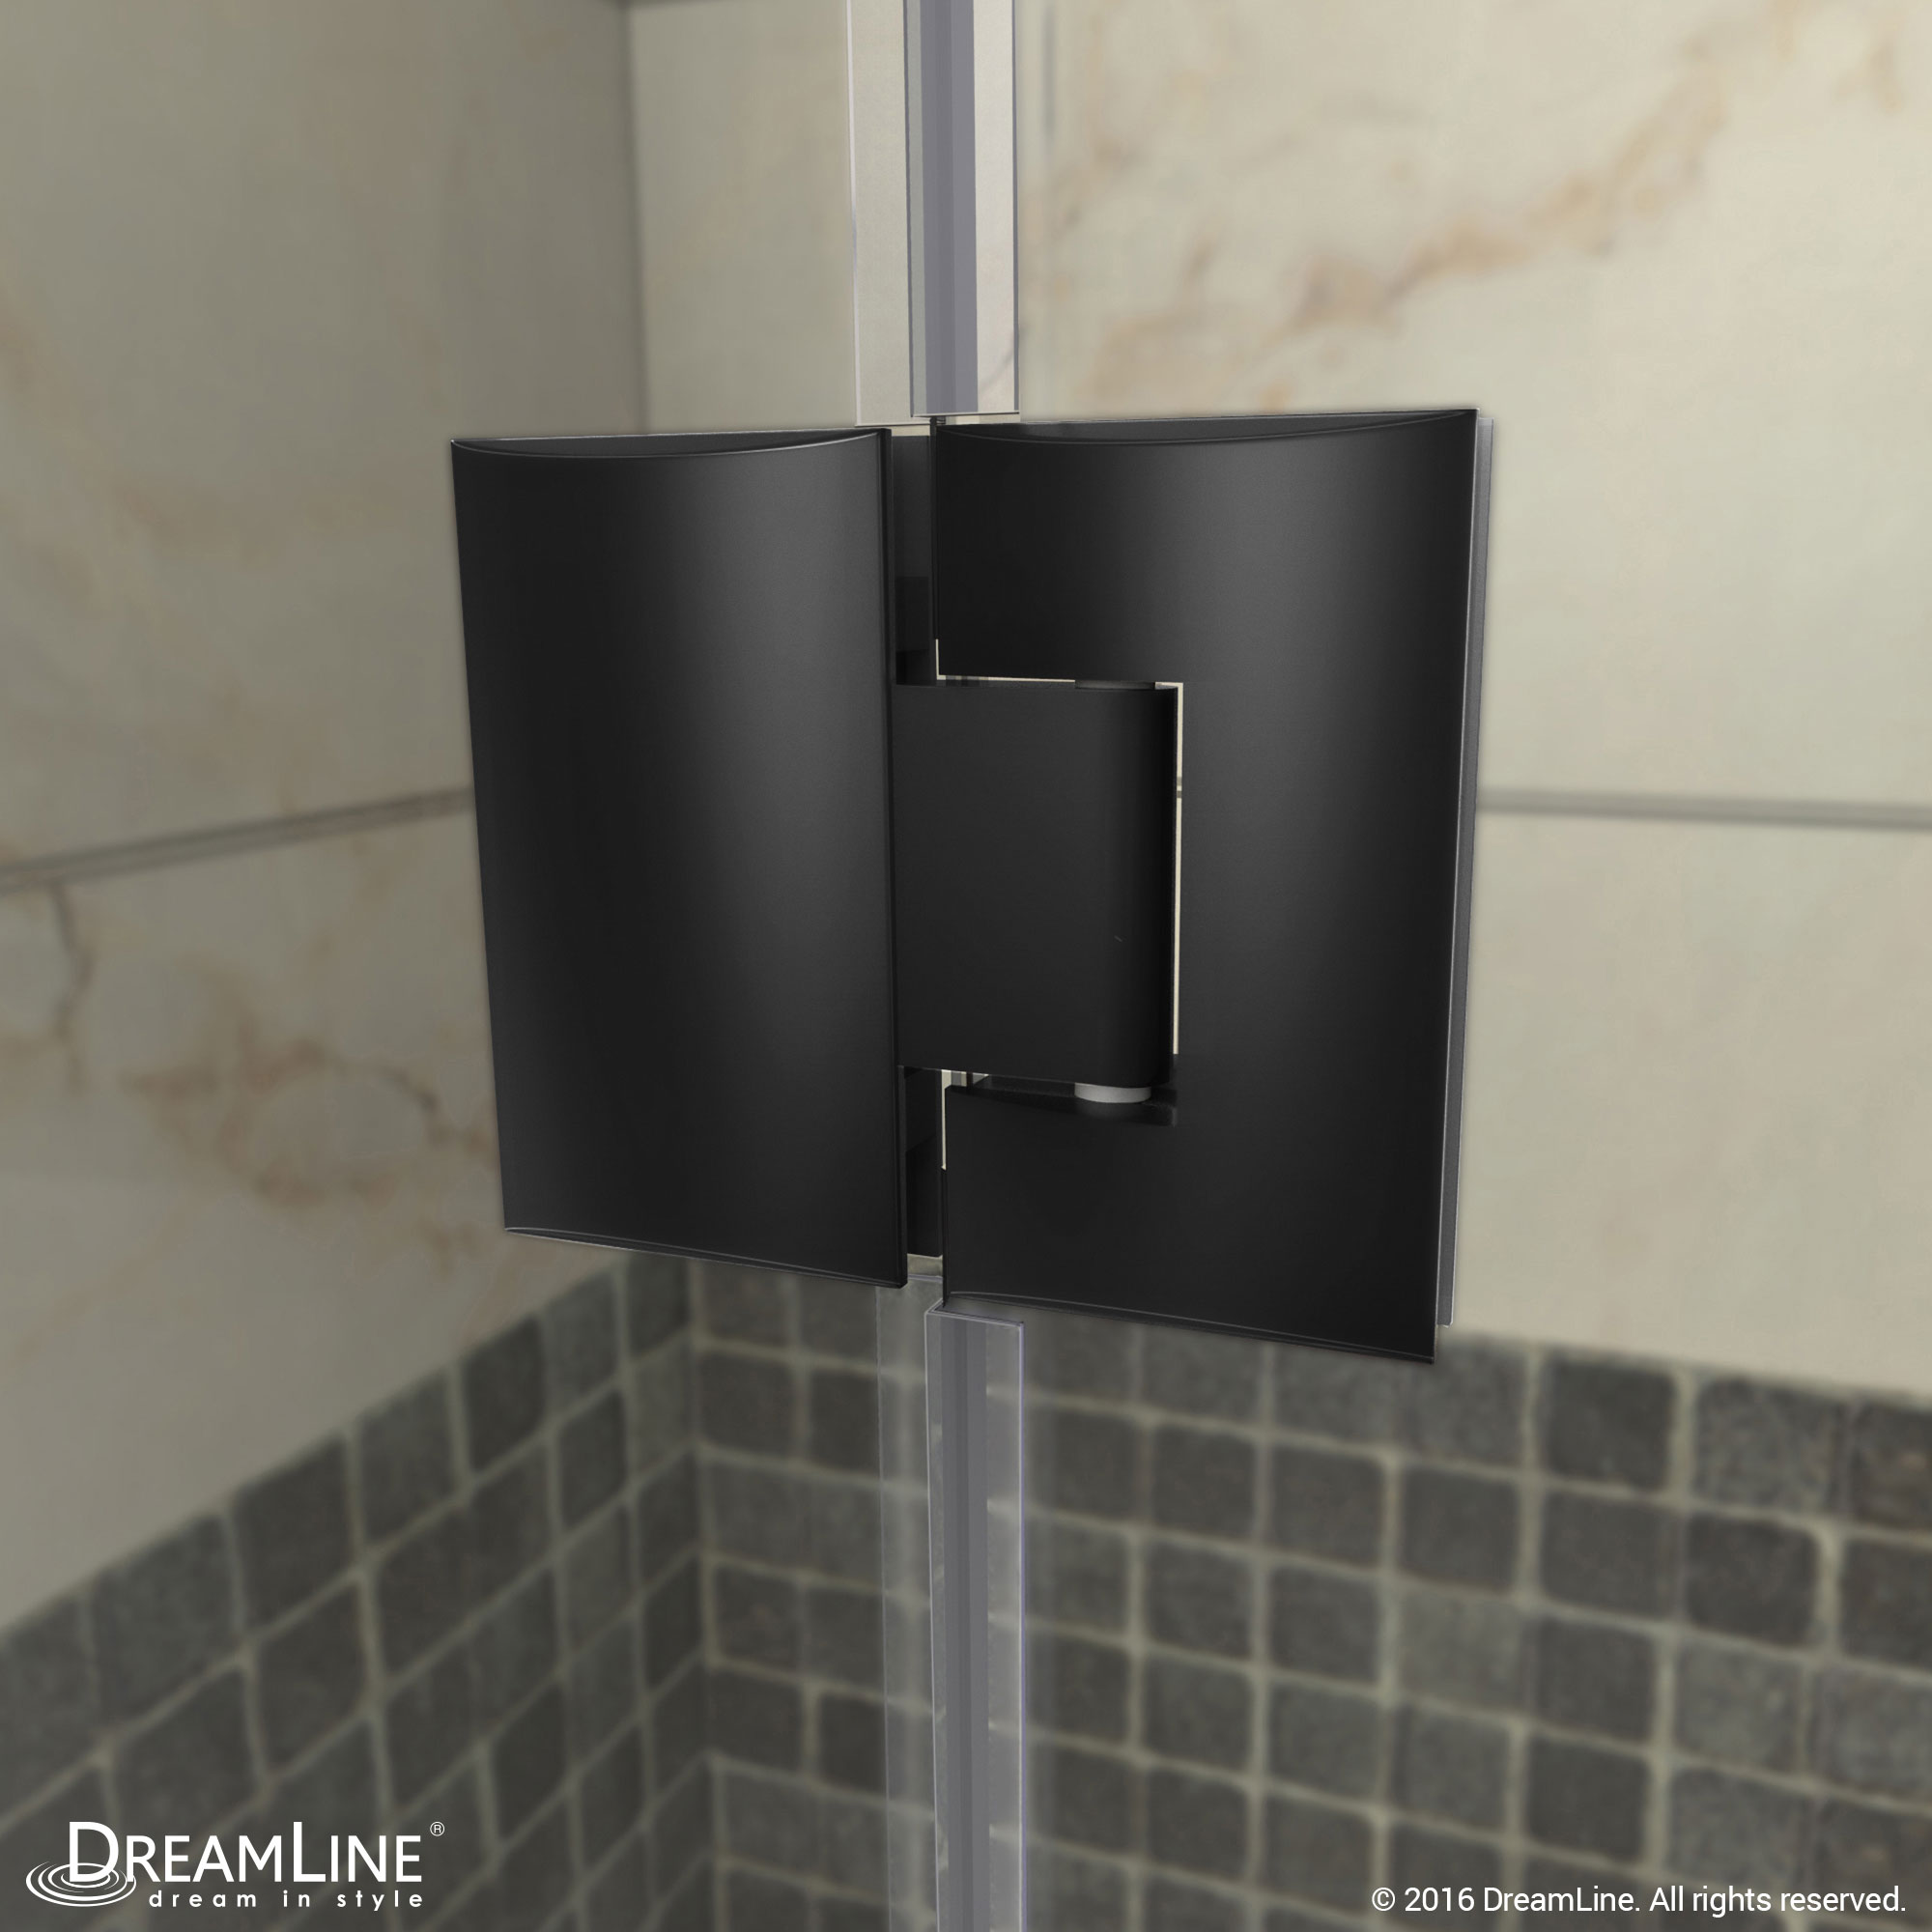 DreamLine Prism Lux 36 in. D x 36 in. W x 74 3/4 in. H Hinged Shower Enclosure in Satin Black with Corner Drain White Base Kit